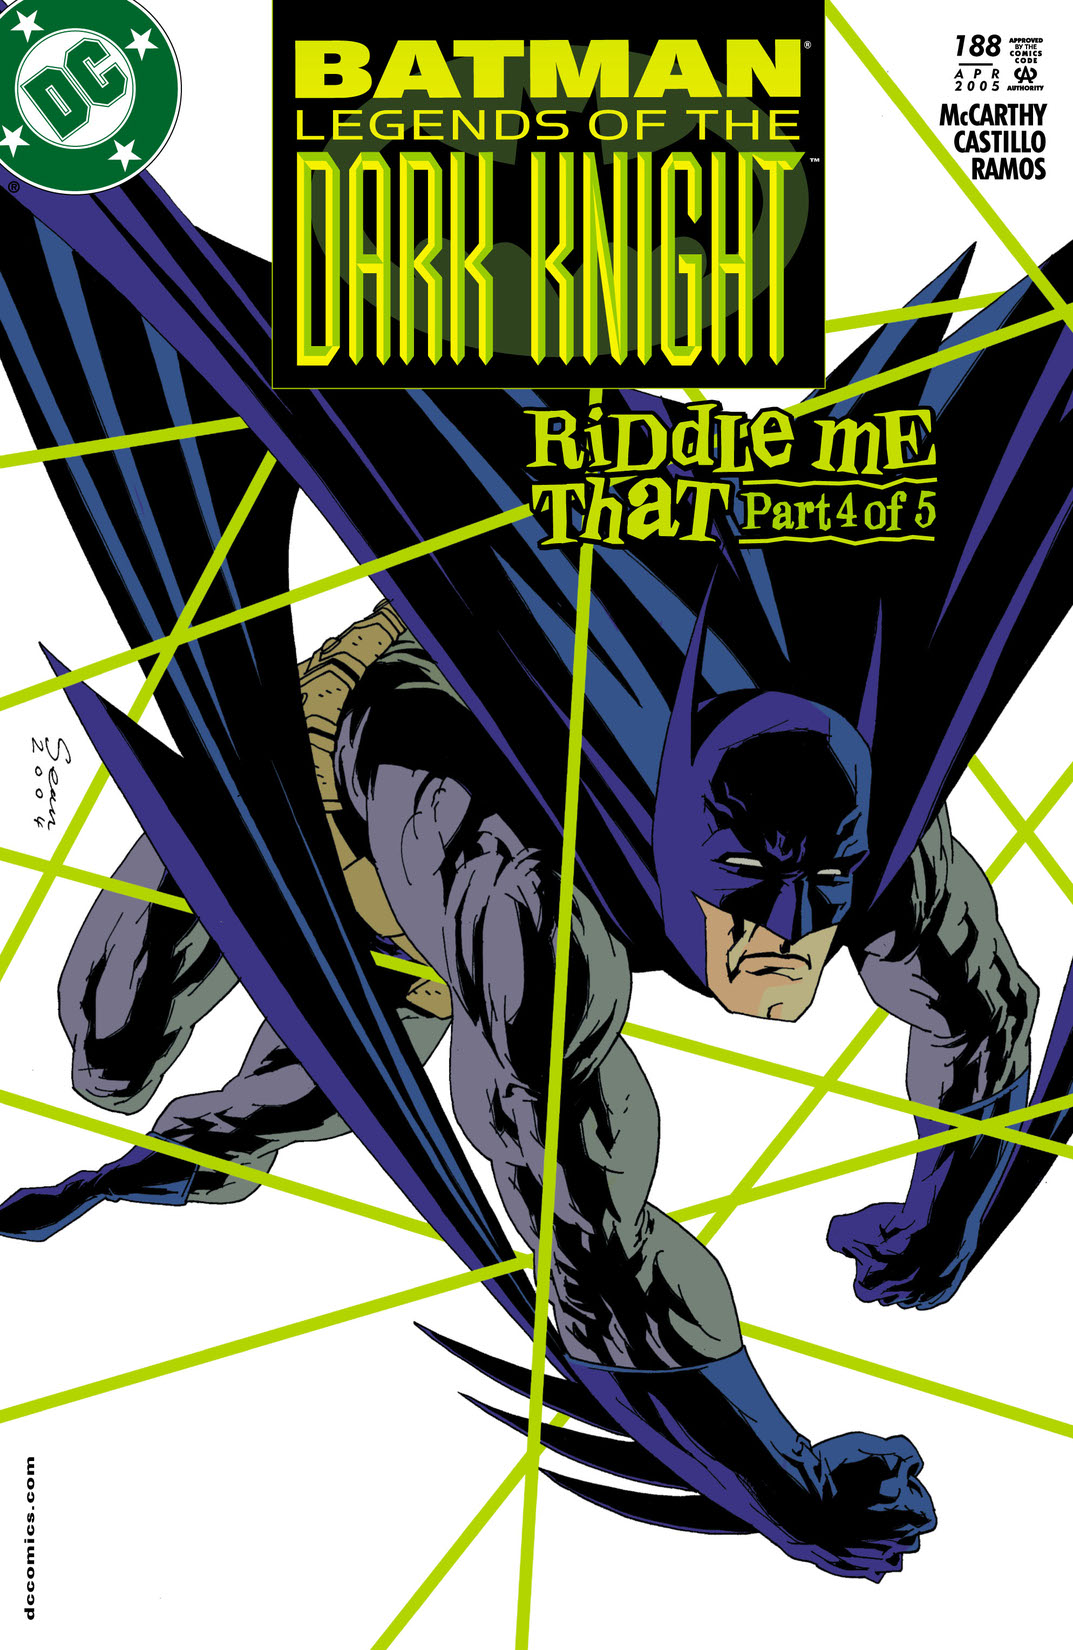 Batman: Legends of the Dark Knight #188 preview images